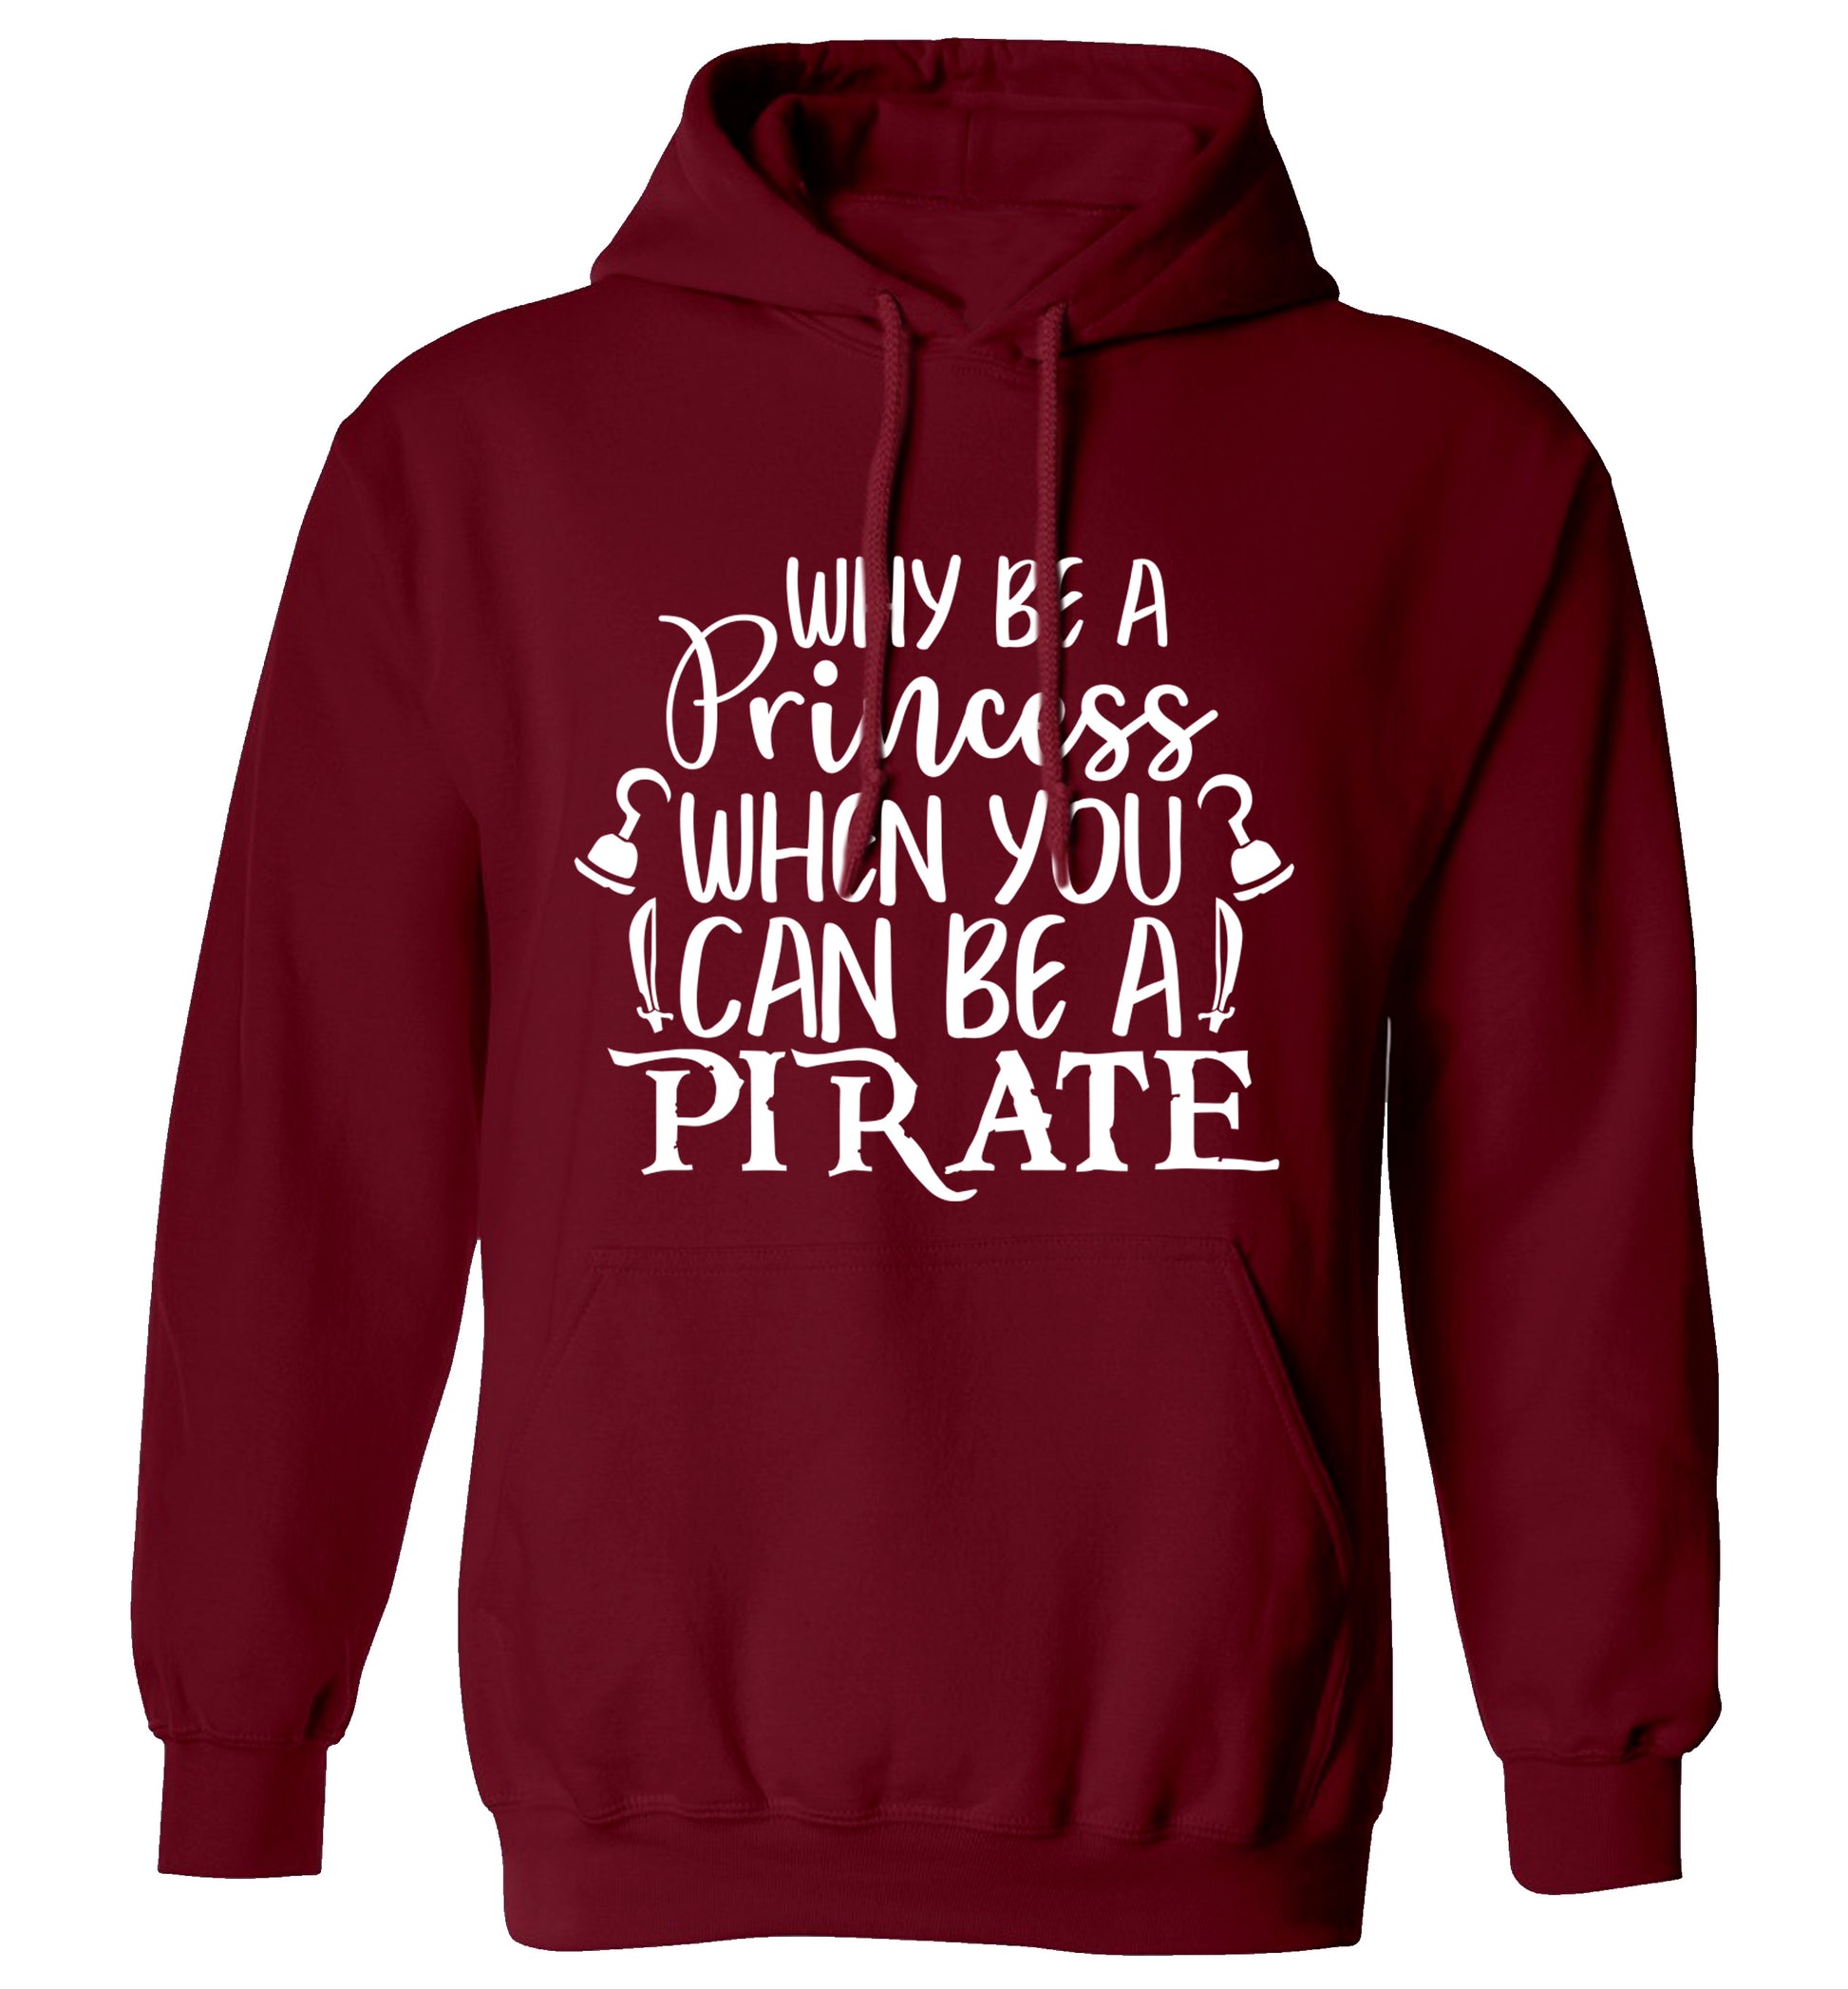 Why be a princess when you can be a pirate? adults unisex maroon hoodie 2XL